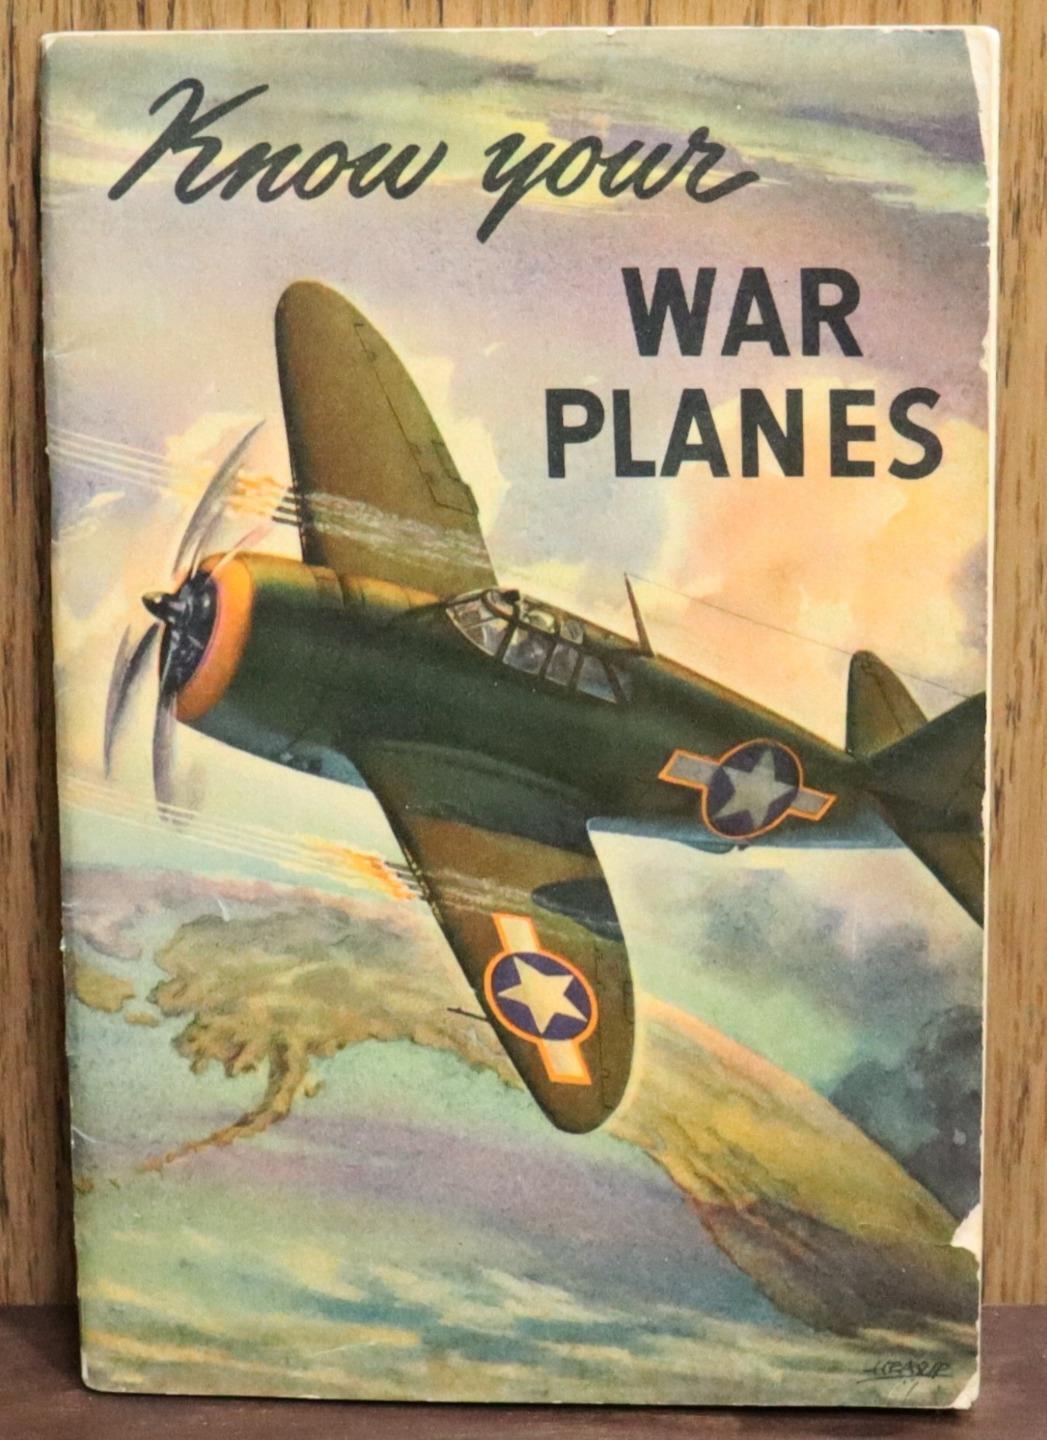 WW II KNOW YOUR WAR PLANES BOOKLET BY COCA COLA COLOR PAGES 40 PAGES ORIGINAL